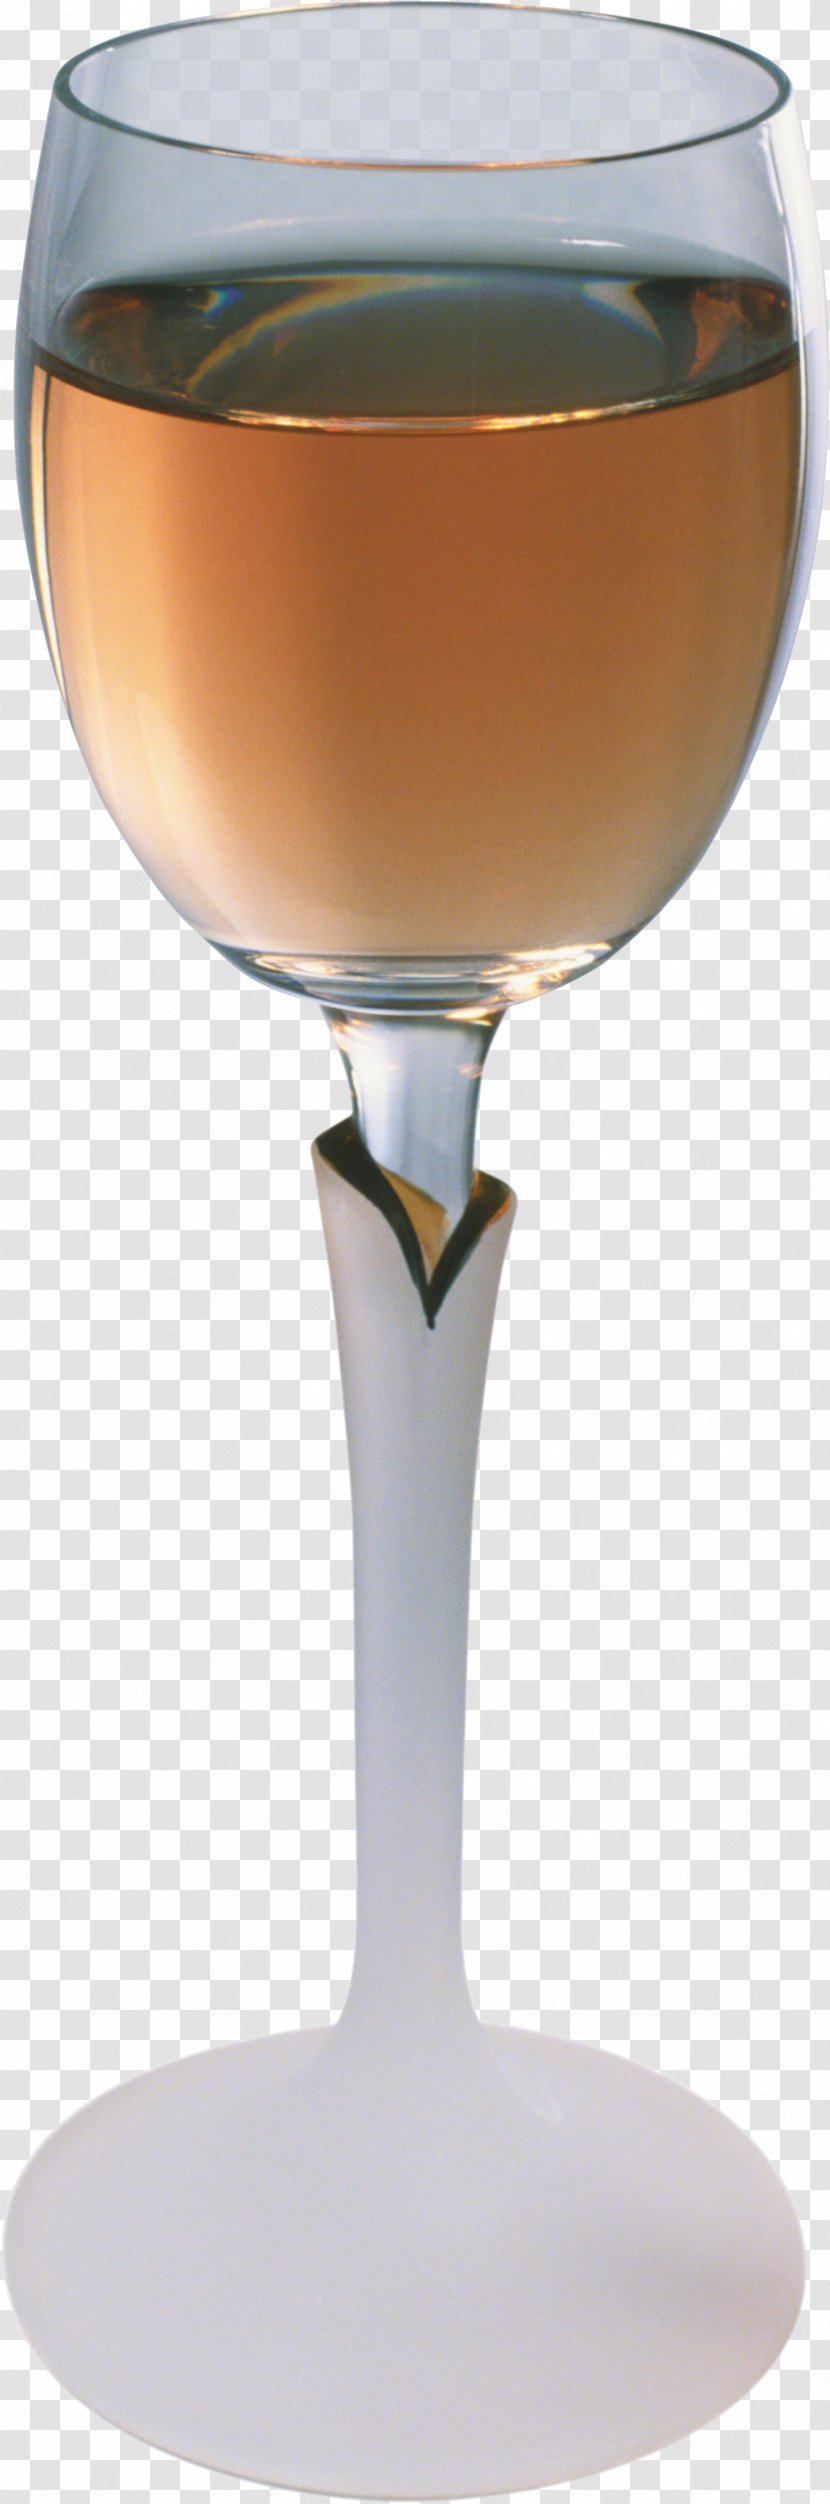 Wine Glass Liqueur Champagne Cocktail - Cup - Mimosa Drinks Transparent PNG